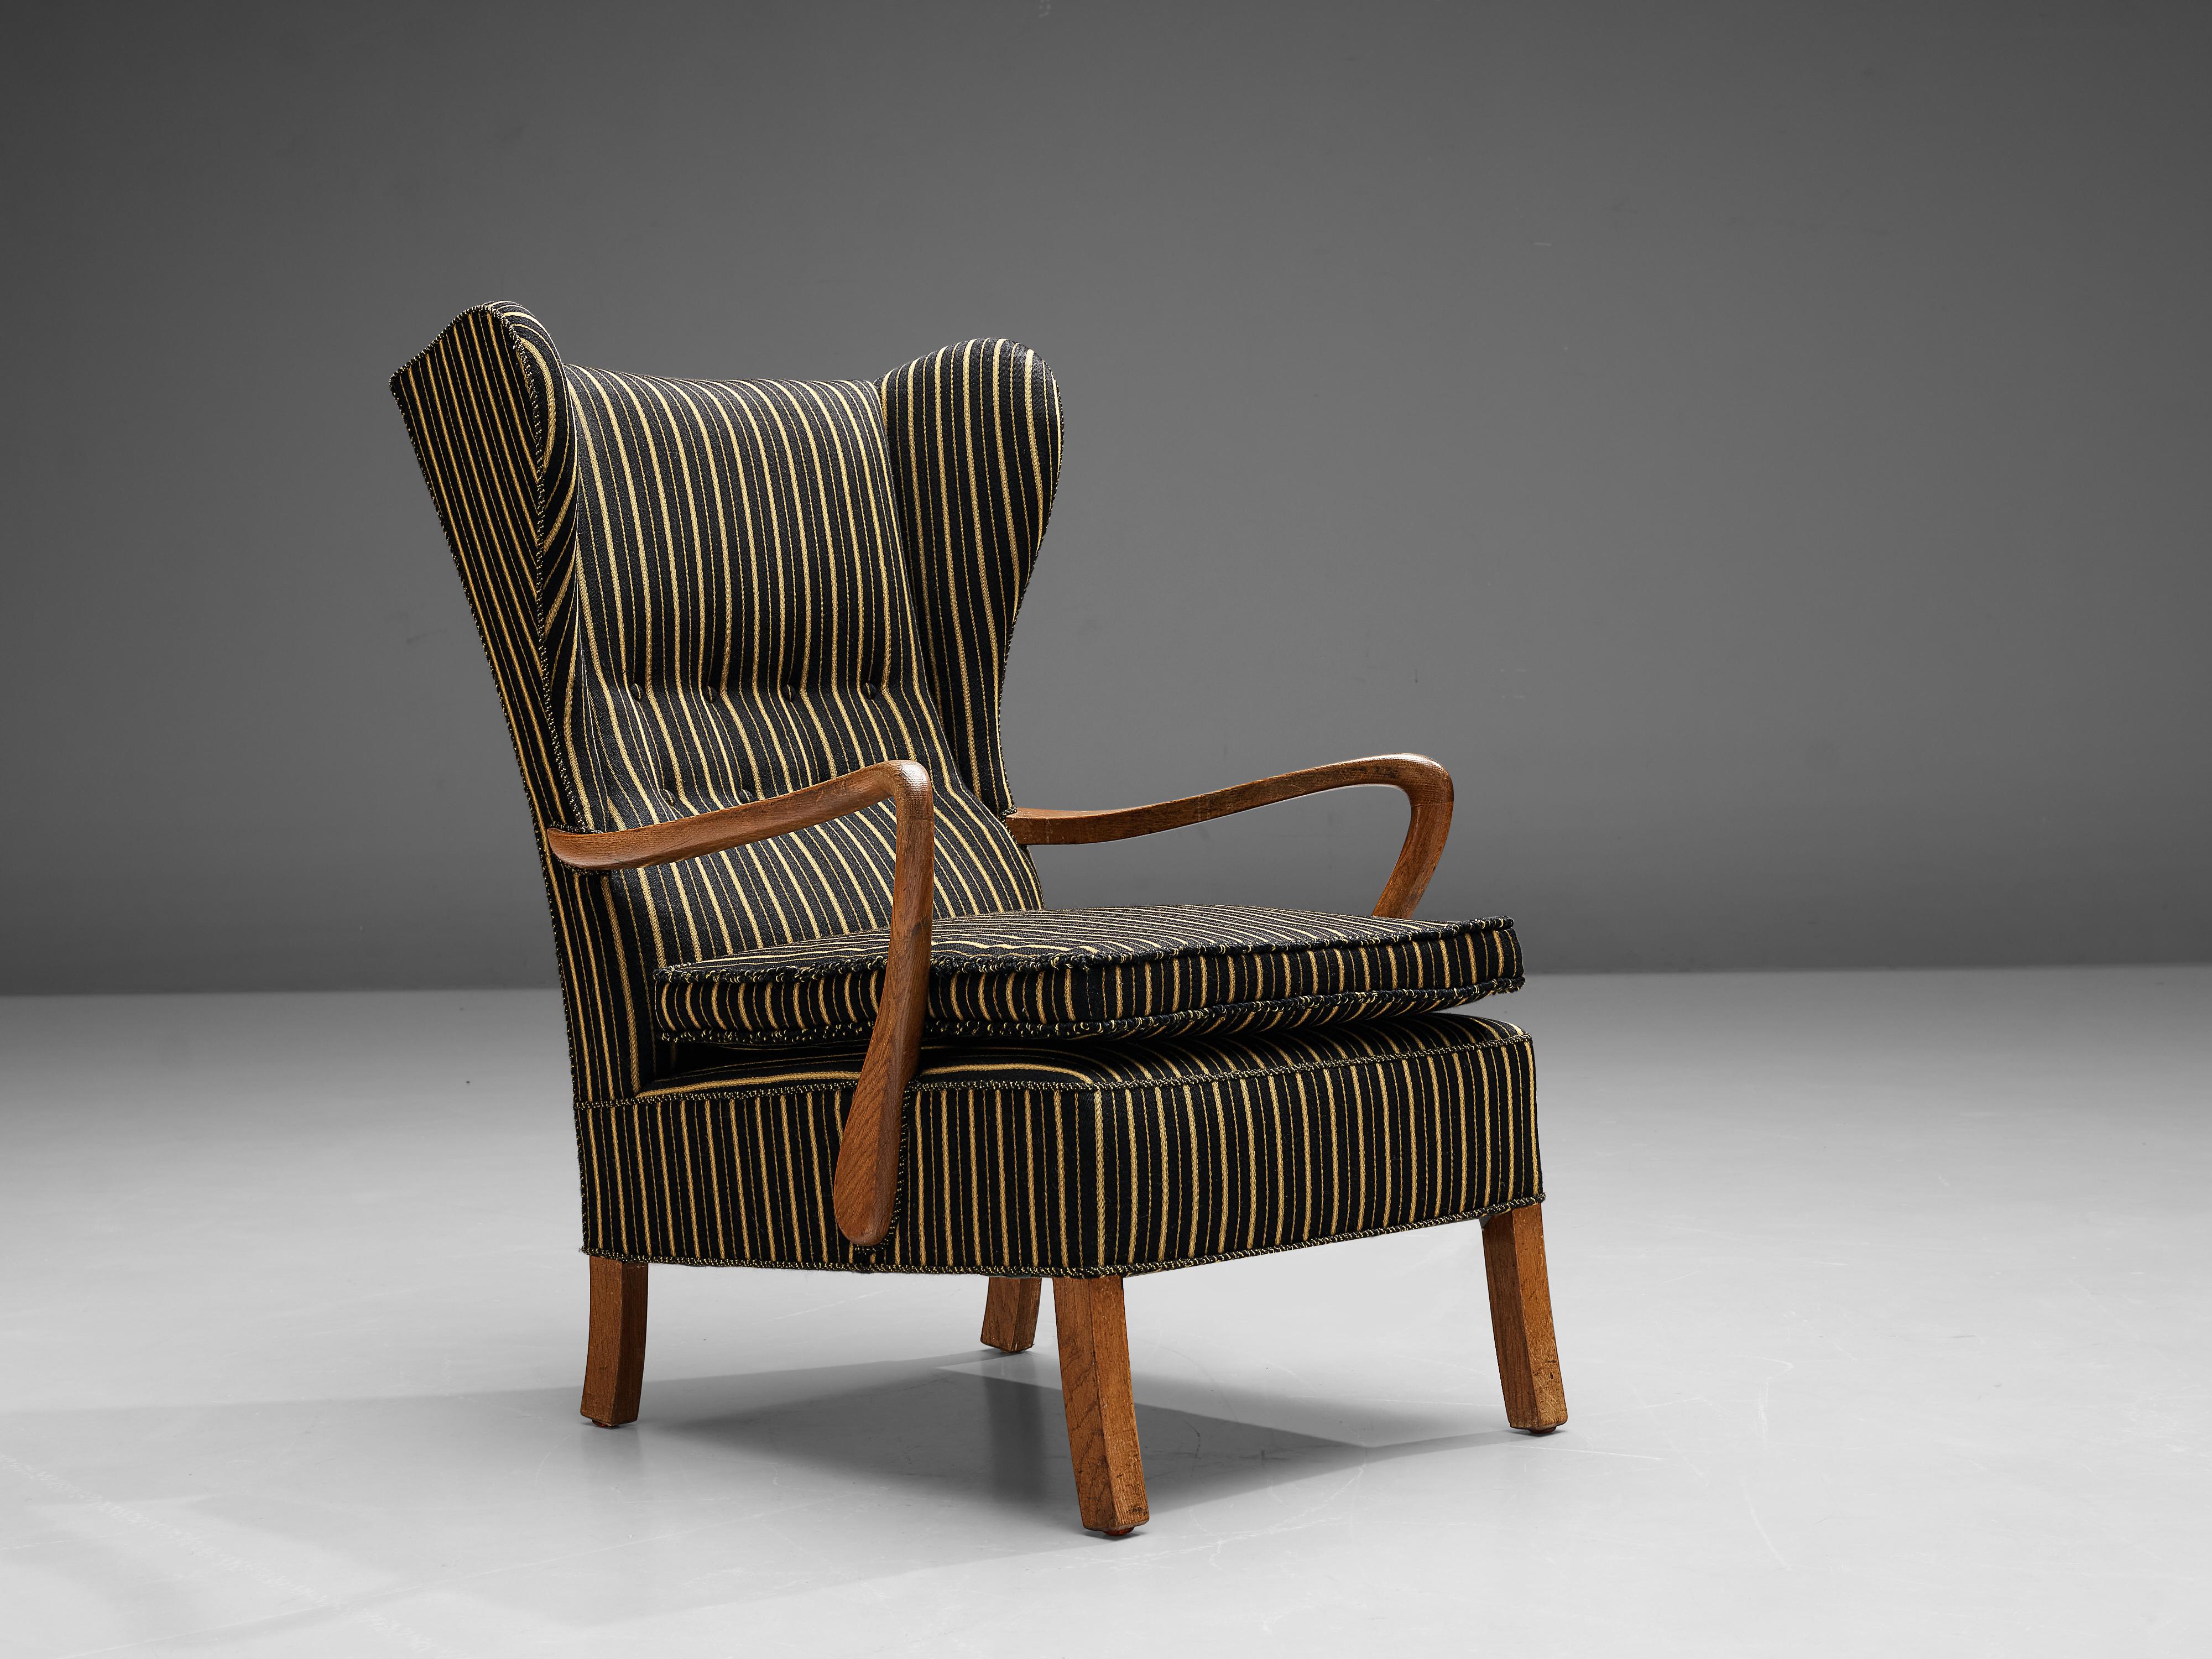 Lounge chair, fabric, wood, Denmark, 1950s

Elegant Danish lounge chair with wonderfully curved armrests in wood. The design of the frame matches perfectly with the seat and backrest cushion. 

Please note that we advise reupholstery before use.